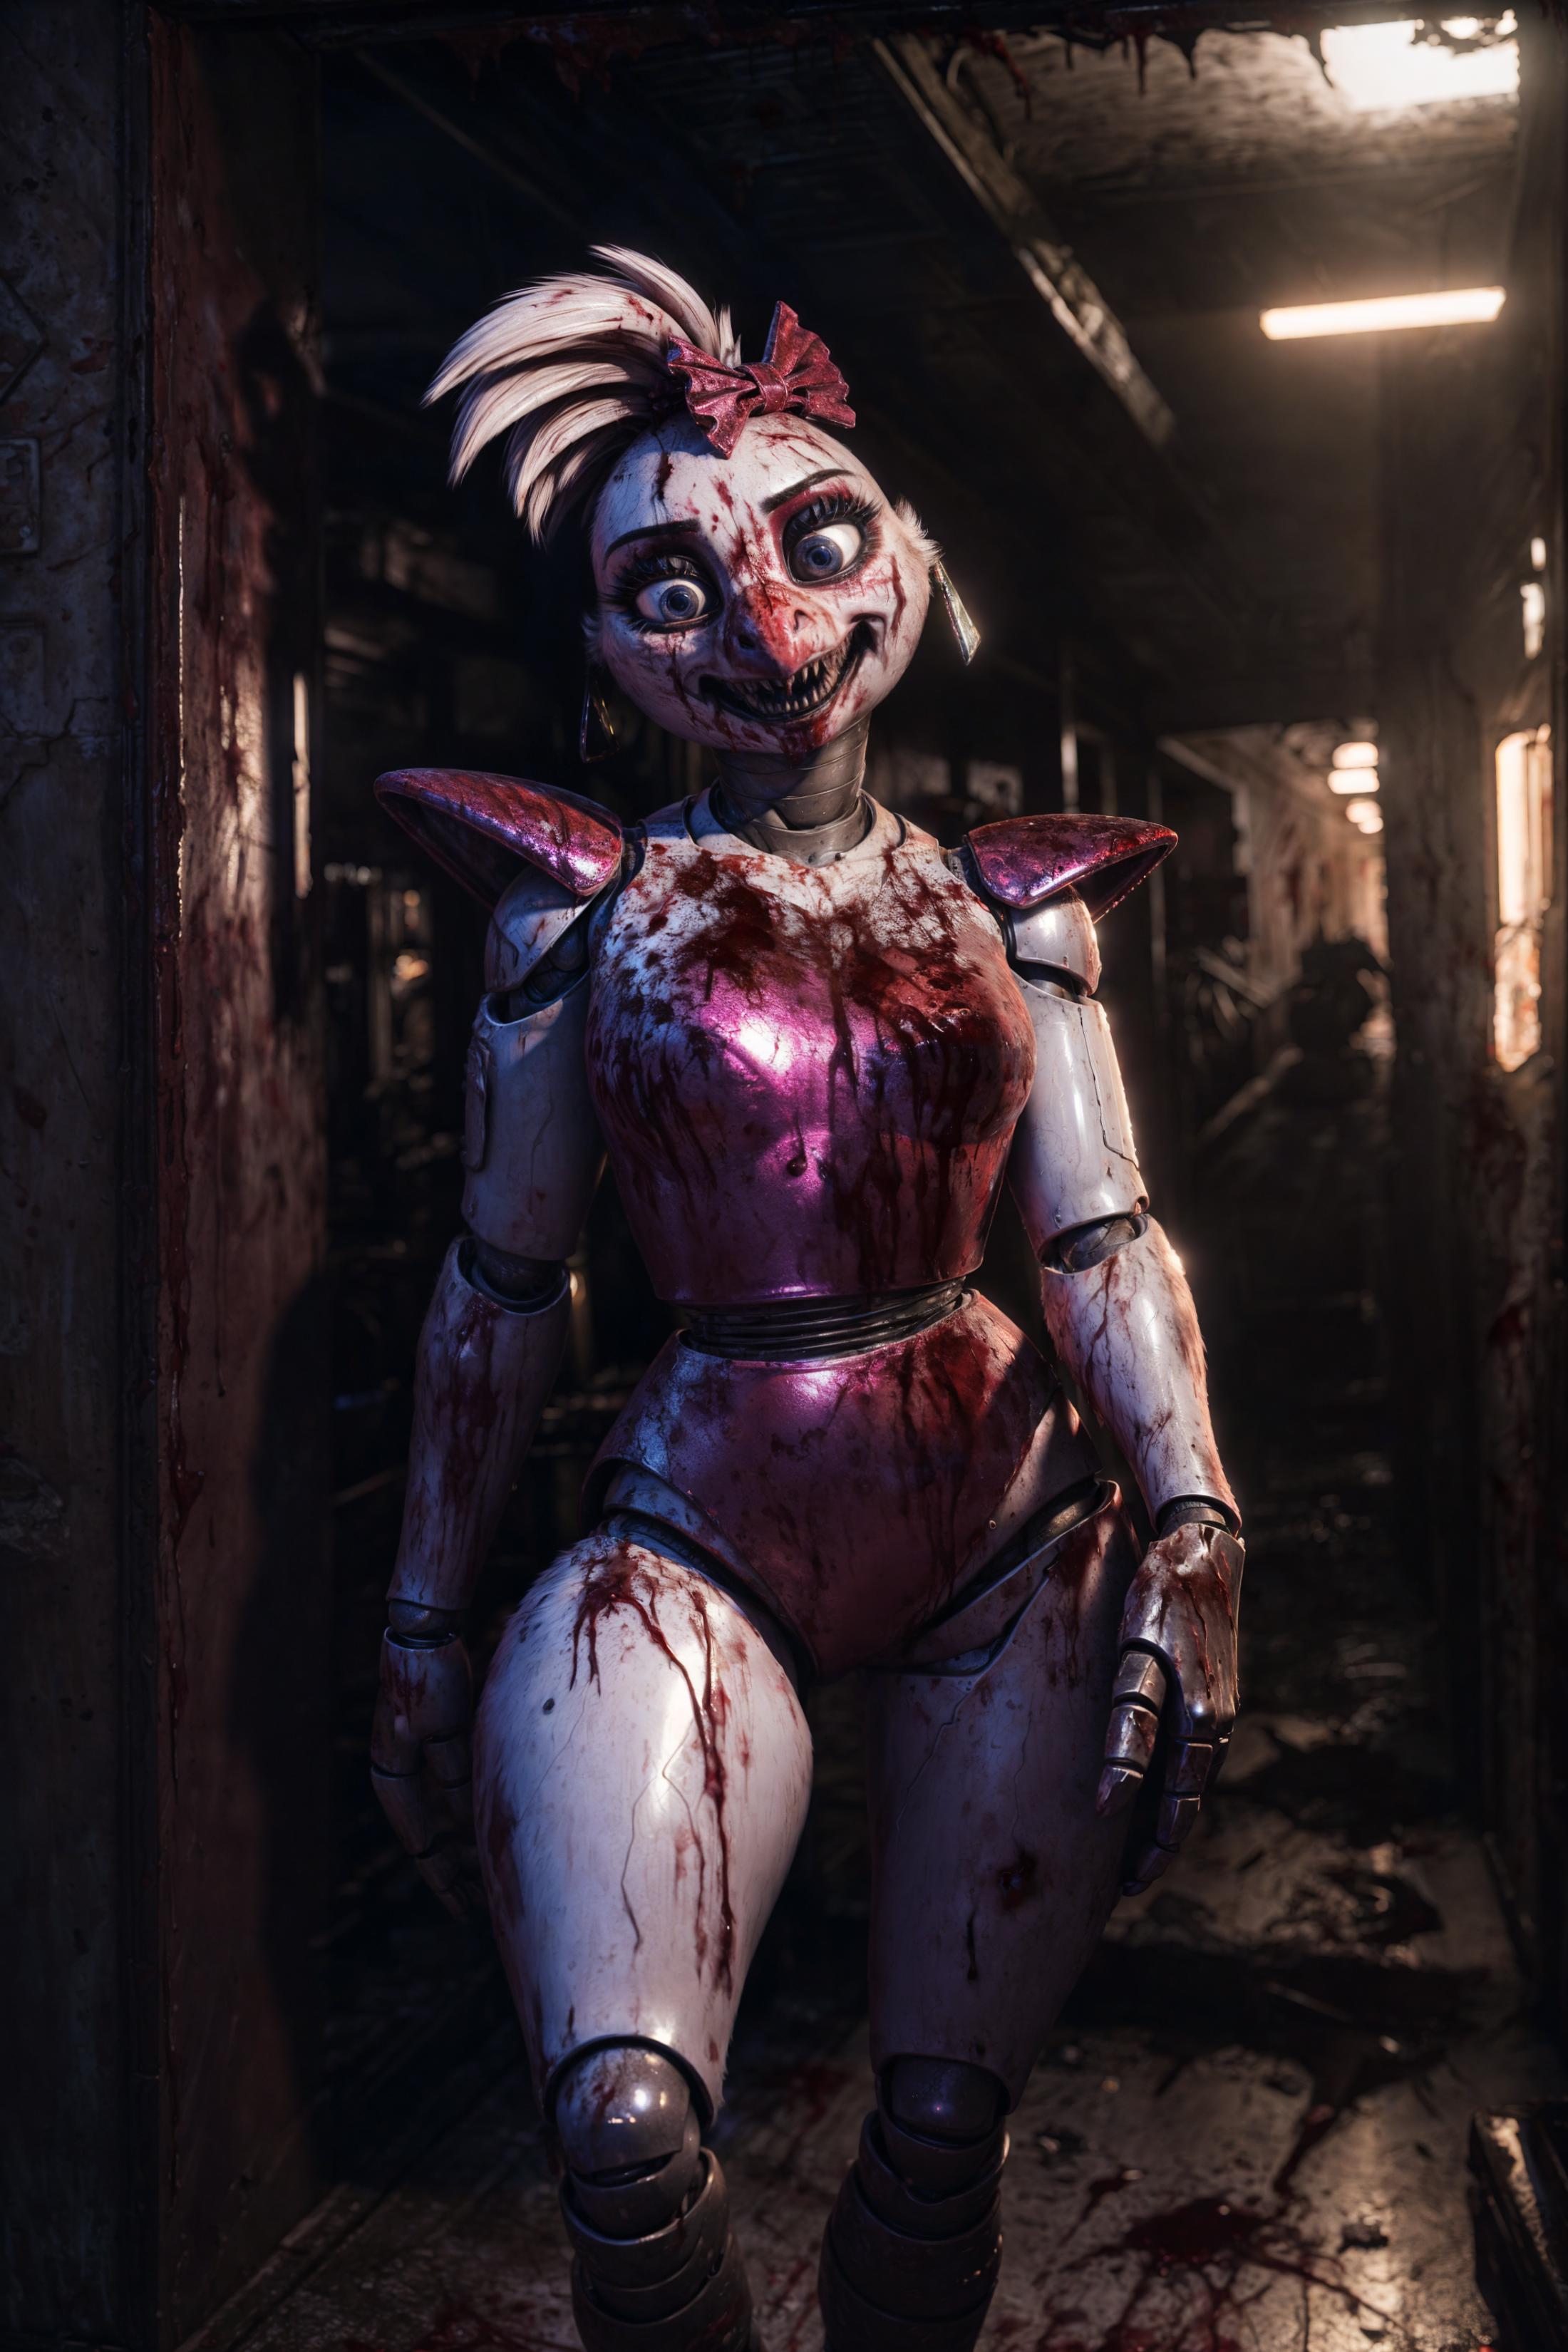 A blood-covered robotic woman in a pink dress standing in a room.